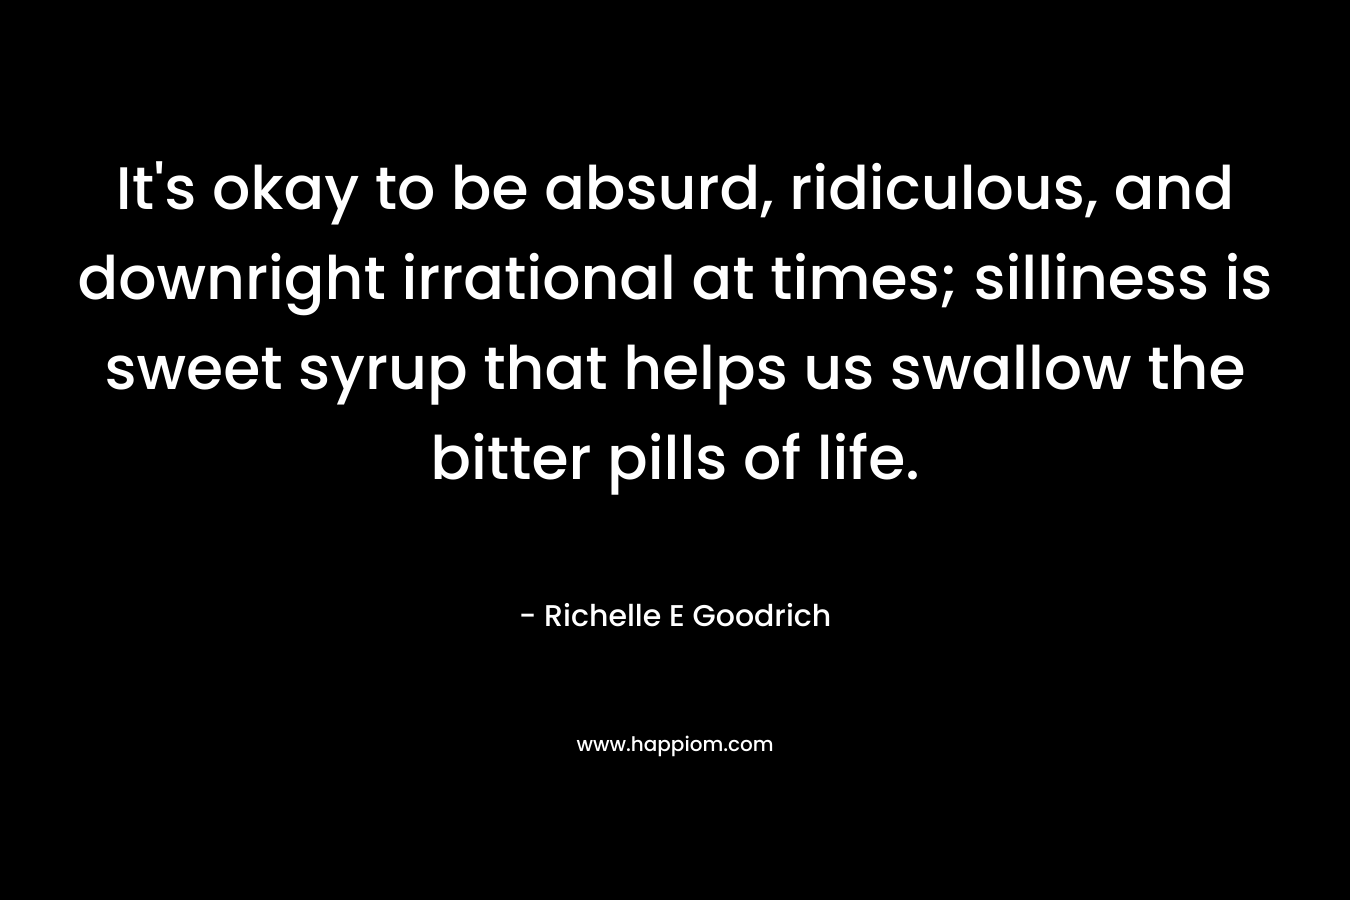 It’s okay to be absurd, ridiculous, and downright irrational at times; silliness is sweet syrup that helps us swallow the bitter pills of life. – Richelle E Goodrich